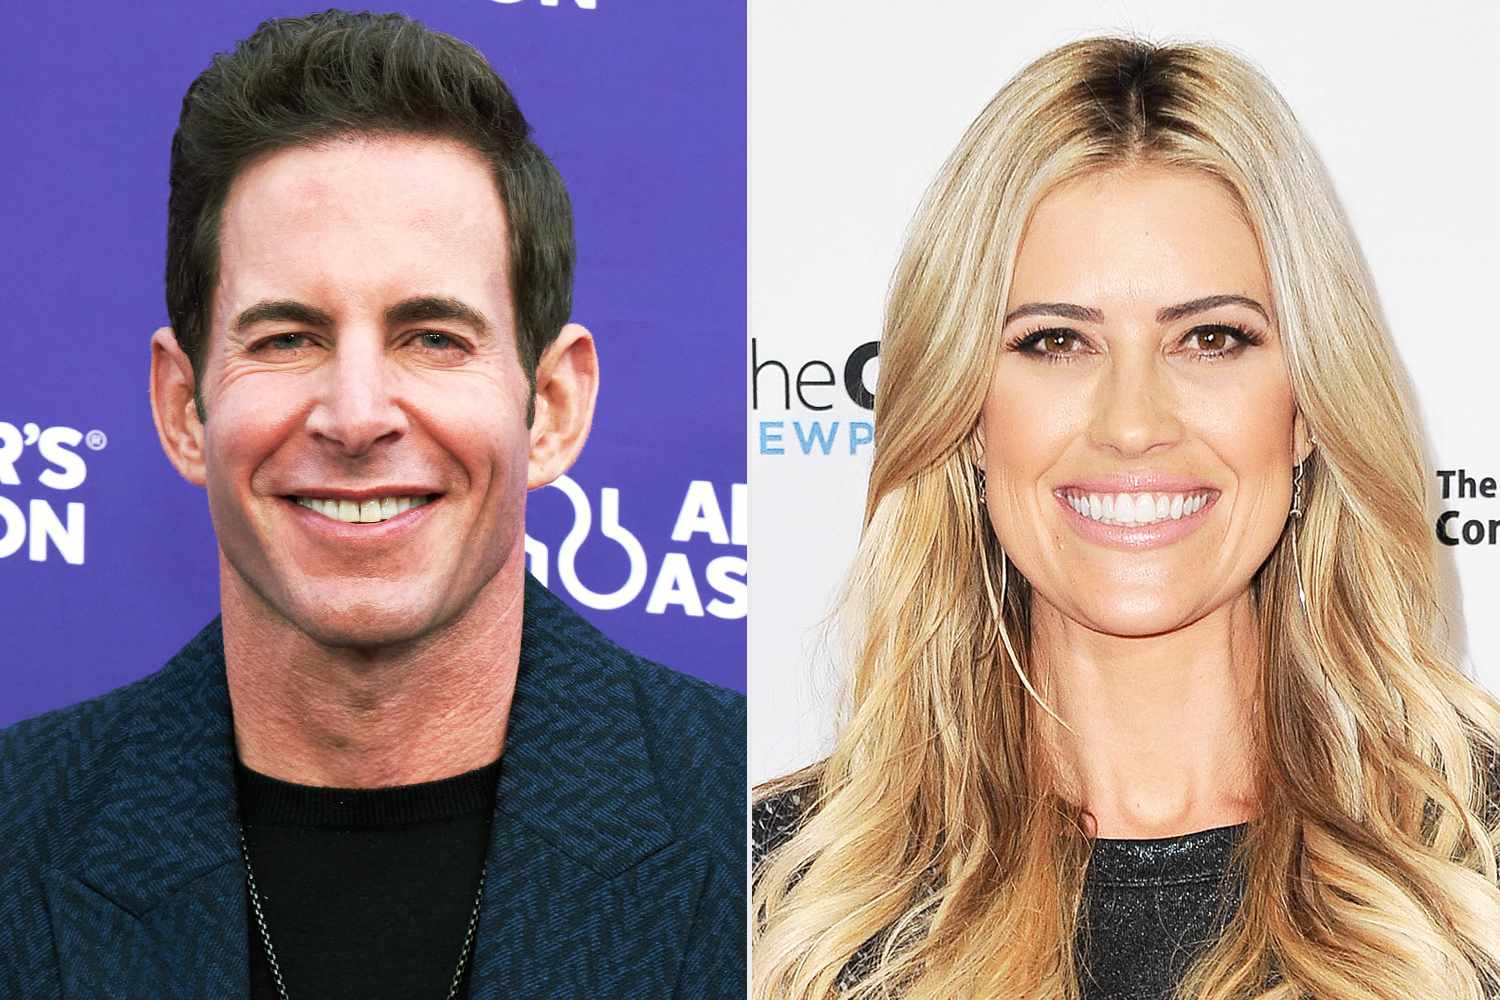 Tarek El Moussa Shares How His Own Parents Inspired Him to ‘Let the Past Be the Past’ with Ex Christina Hall